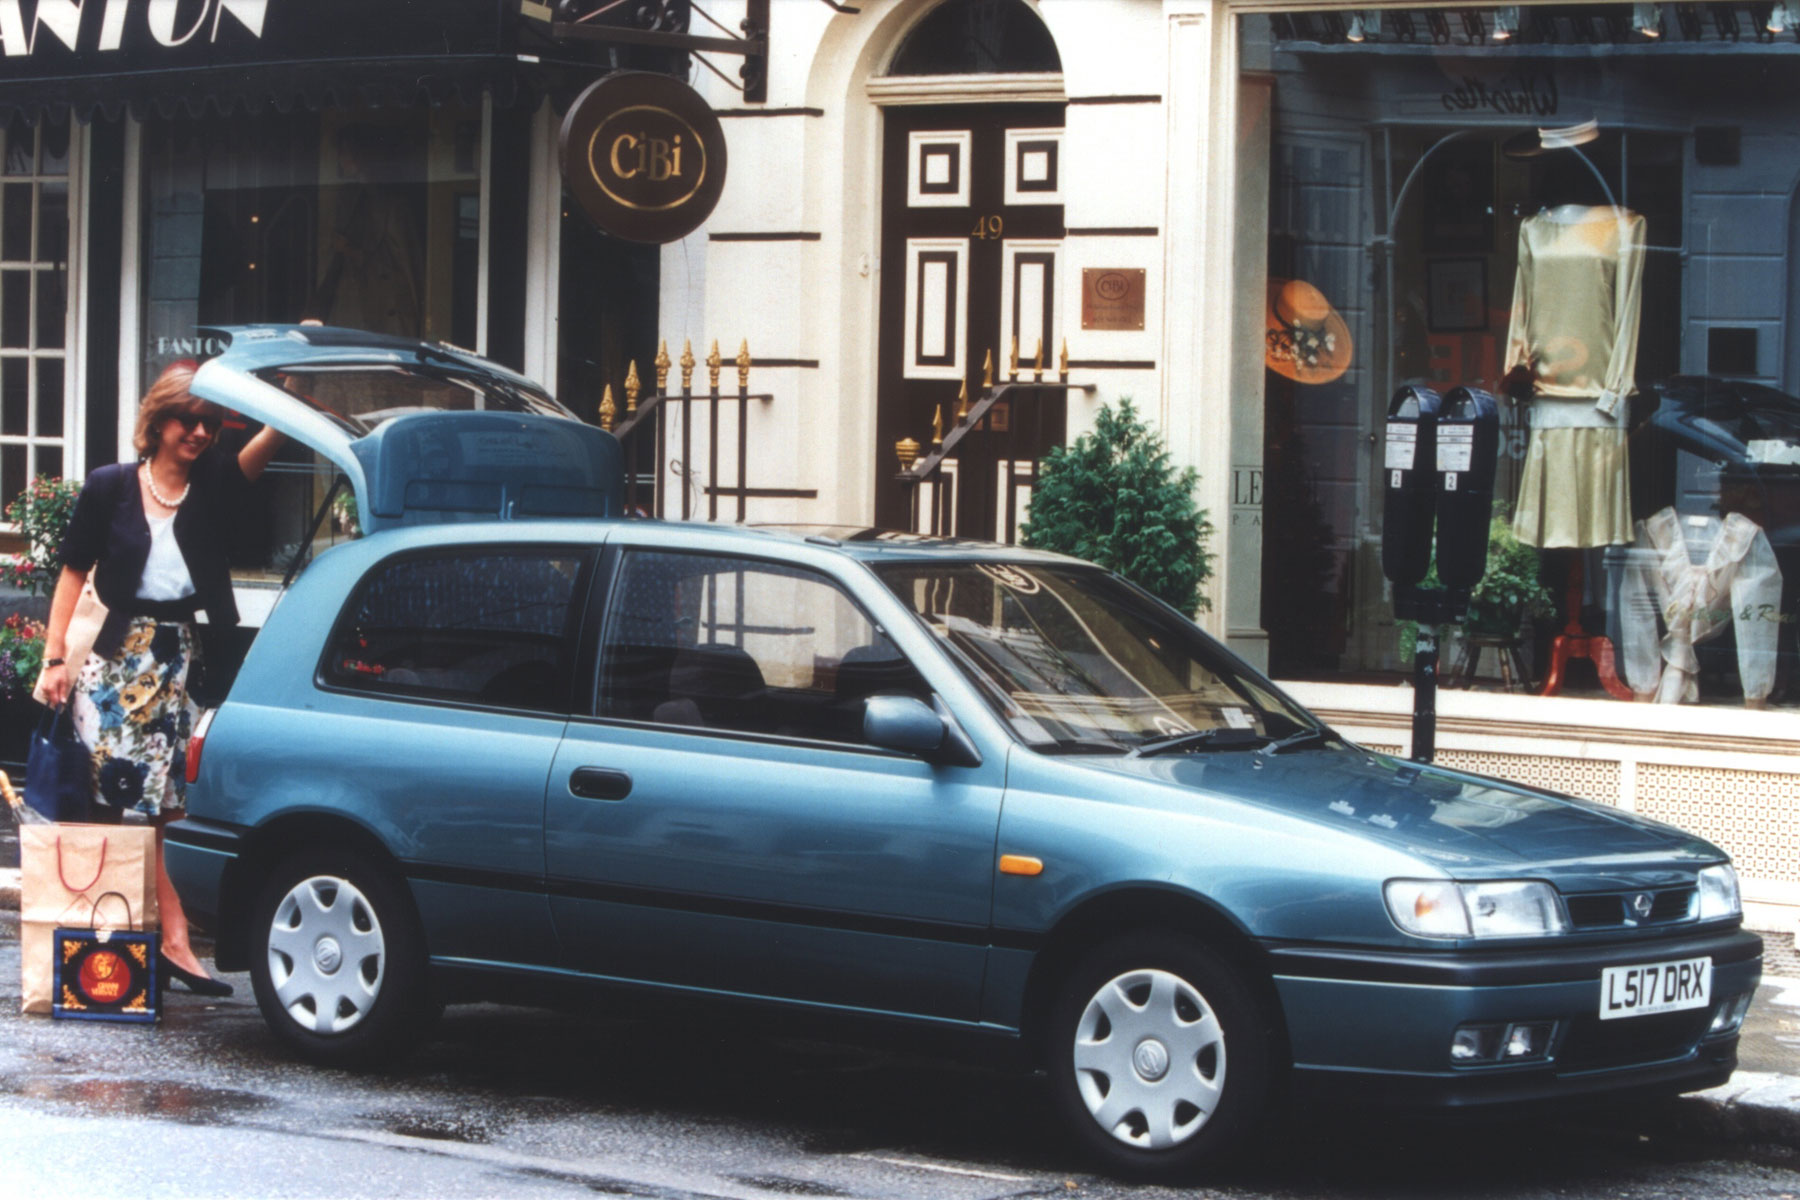 Best-selling cars of 1995